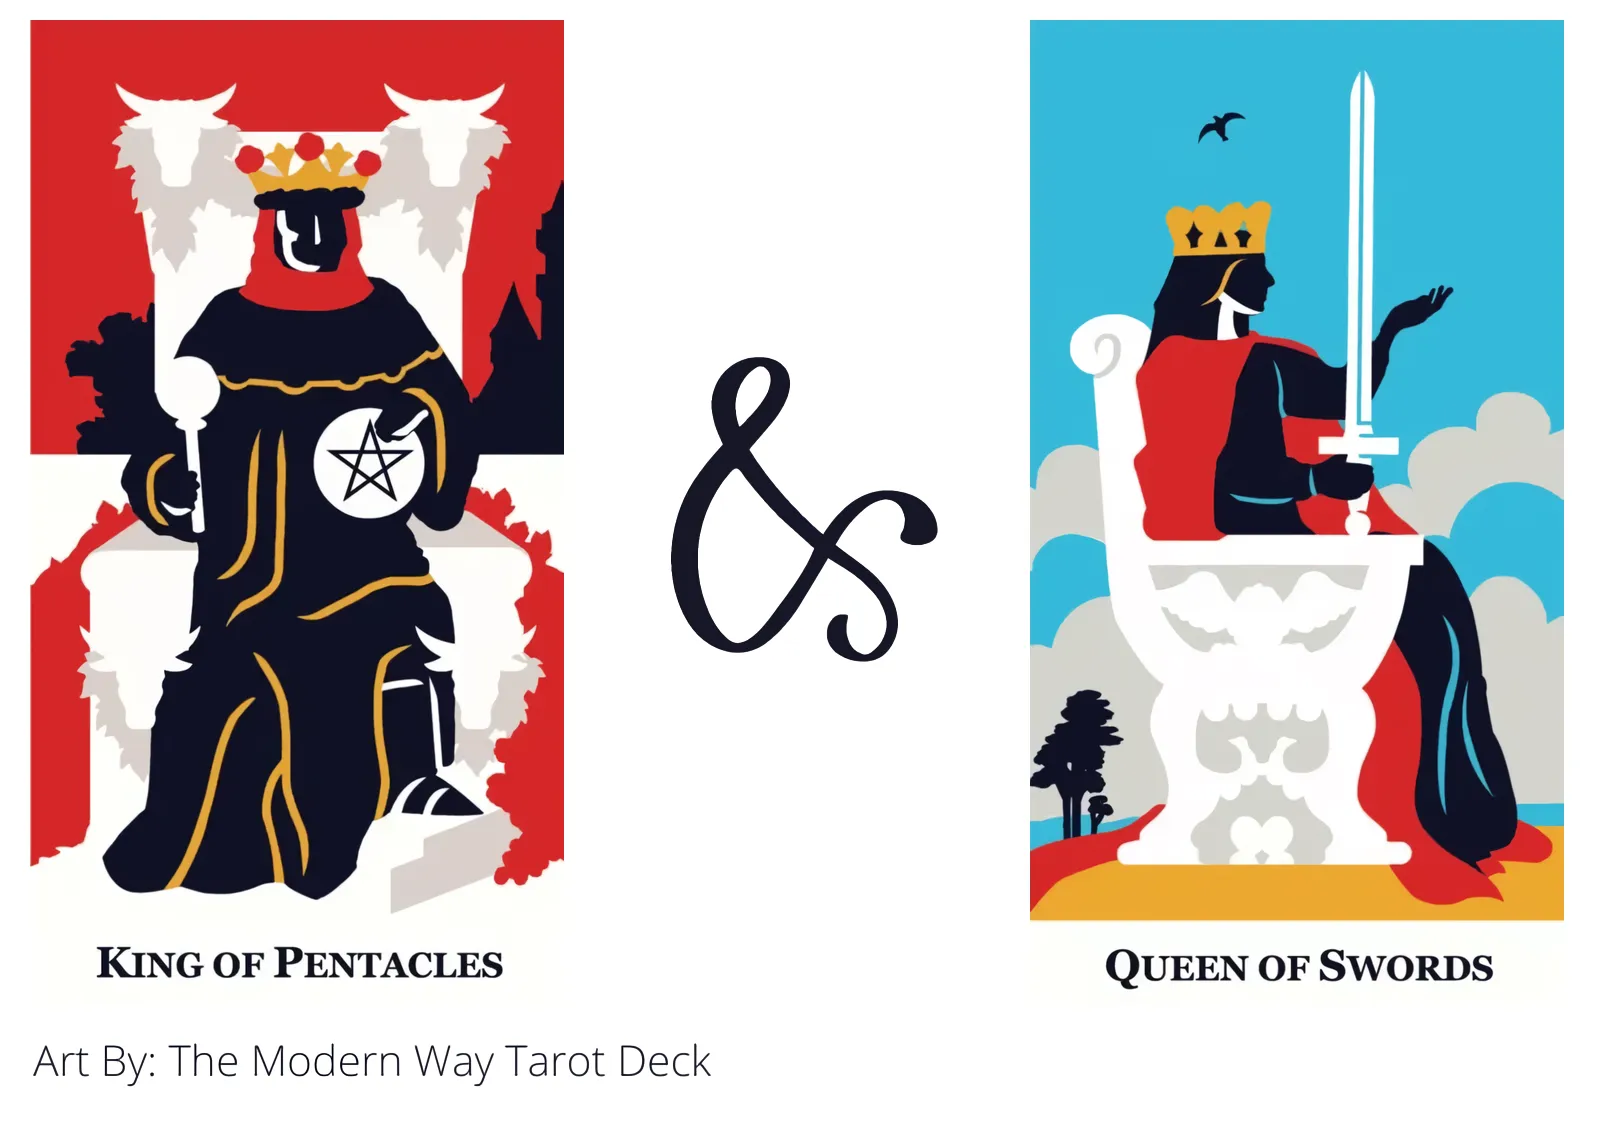 king of pentacles and queen of swords tarot cards together